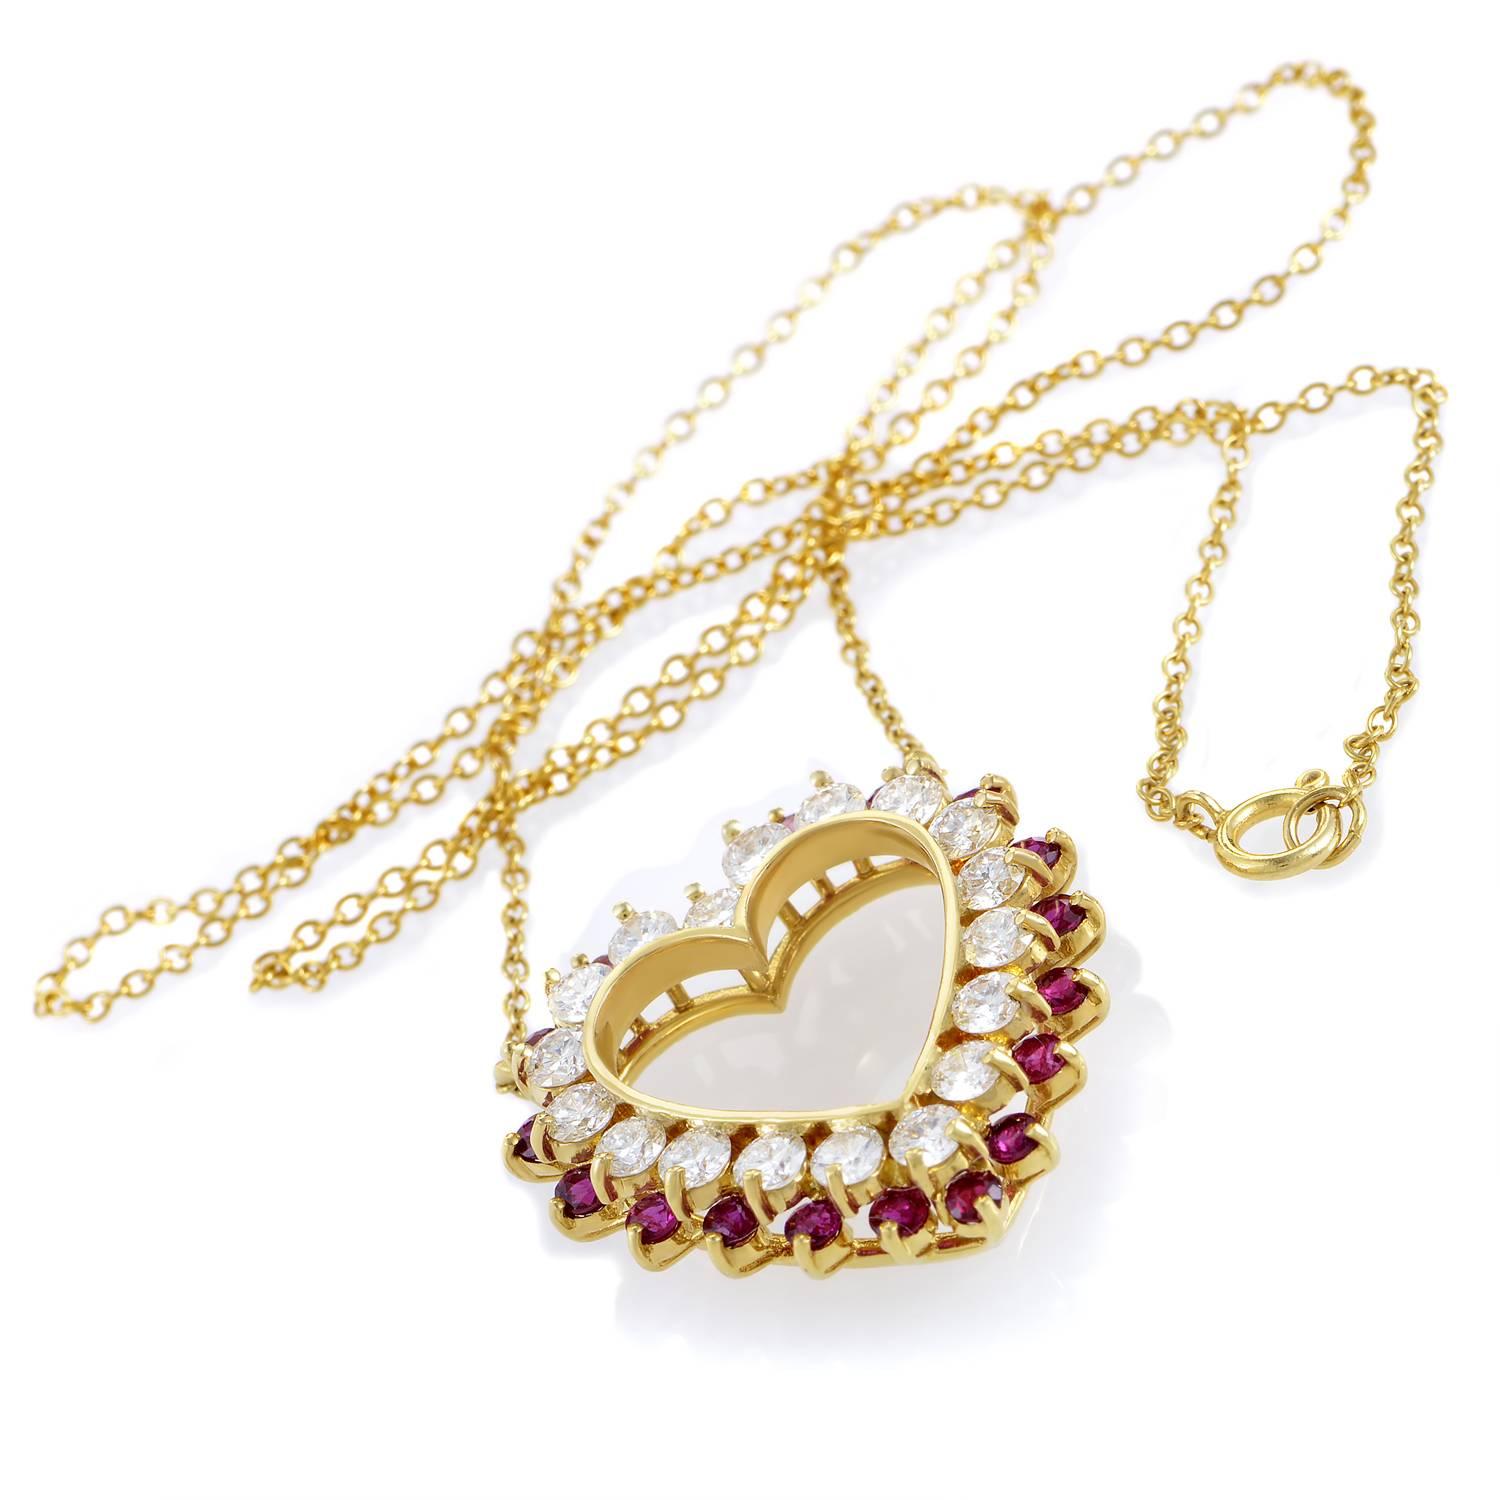 Gracing one of the most compelling motifs in the world of jewelry with exuberant emphasis and feminine spirit, this brilliant necklace from Tiffany & Co. embellishes lovely heart-shaped 18K yellow gold with passionate rubies weighing in total 1.12